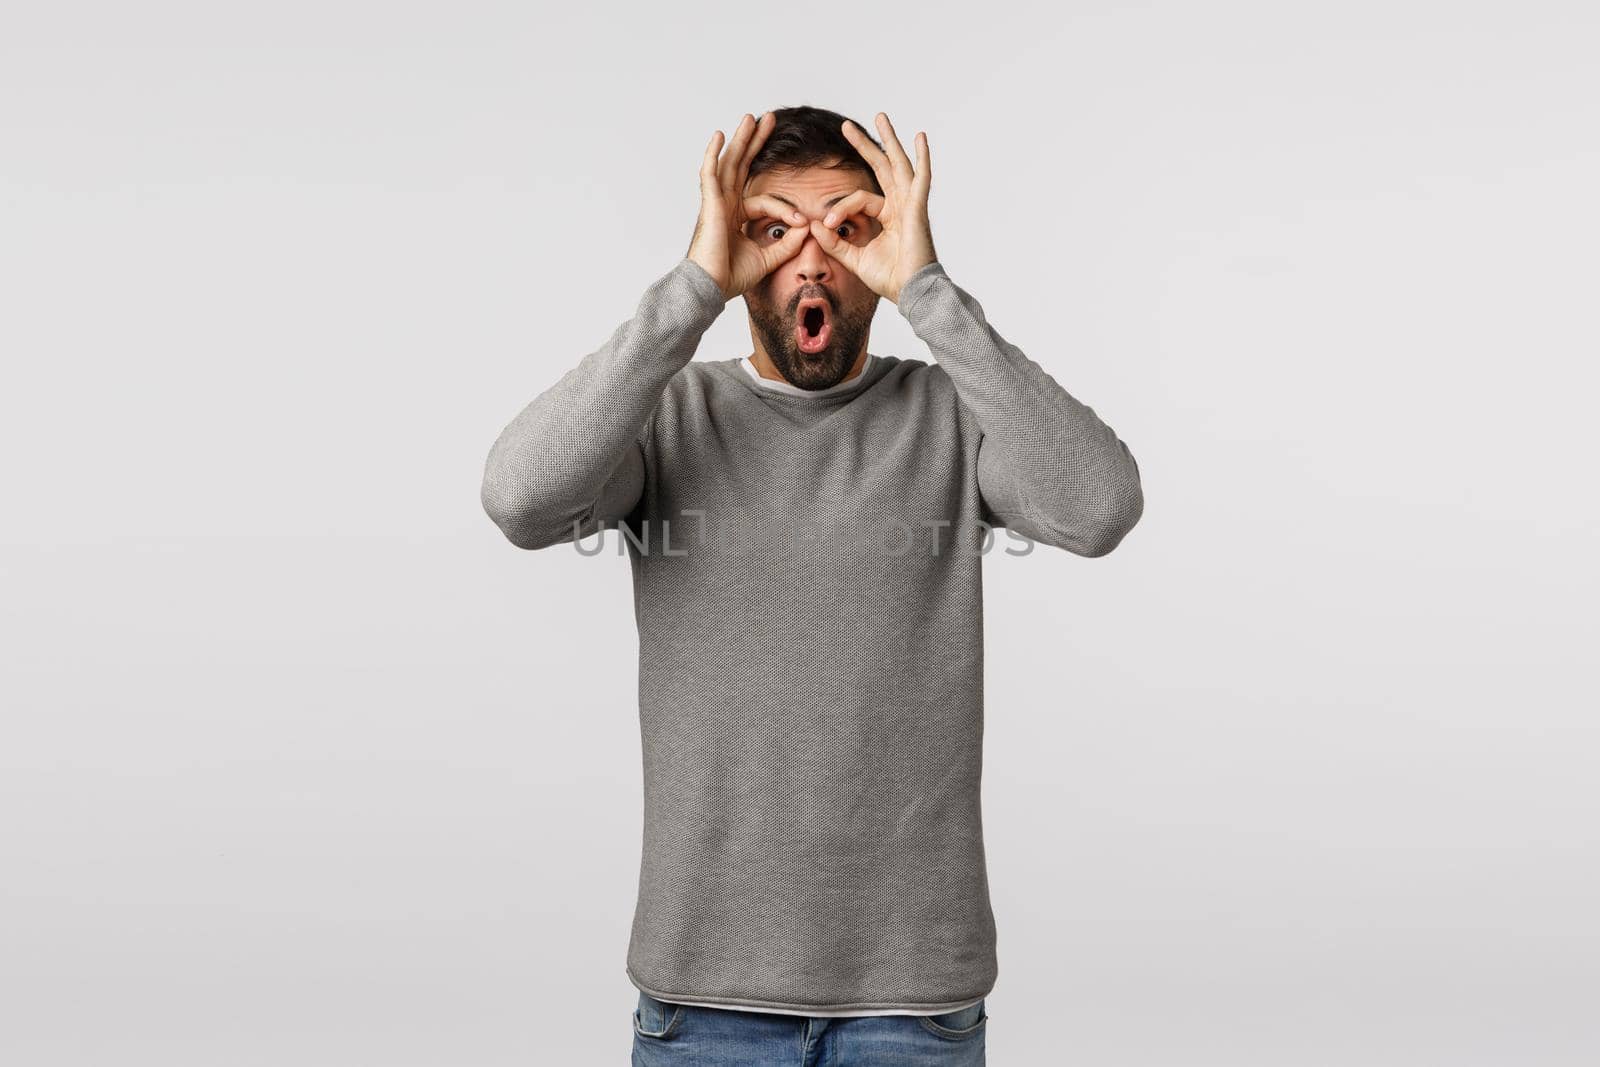 Surprised, excited and fascinated handsome bearded man in grey sweater, make circled with fingers over eyes like glasses or binocular, open mouth gasping amused, see and check out awesome promo by Benzoix